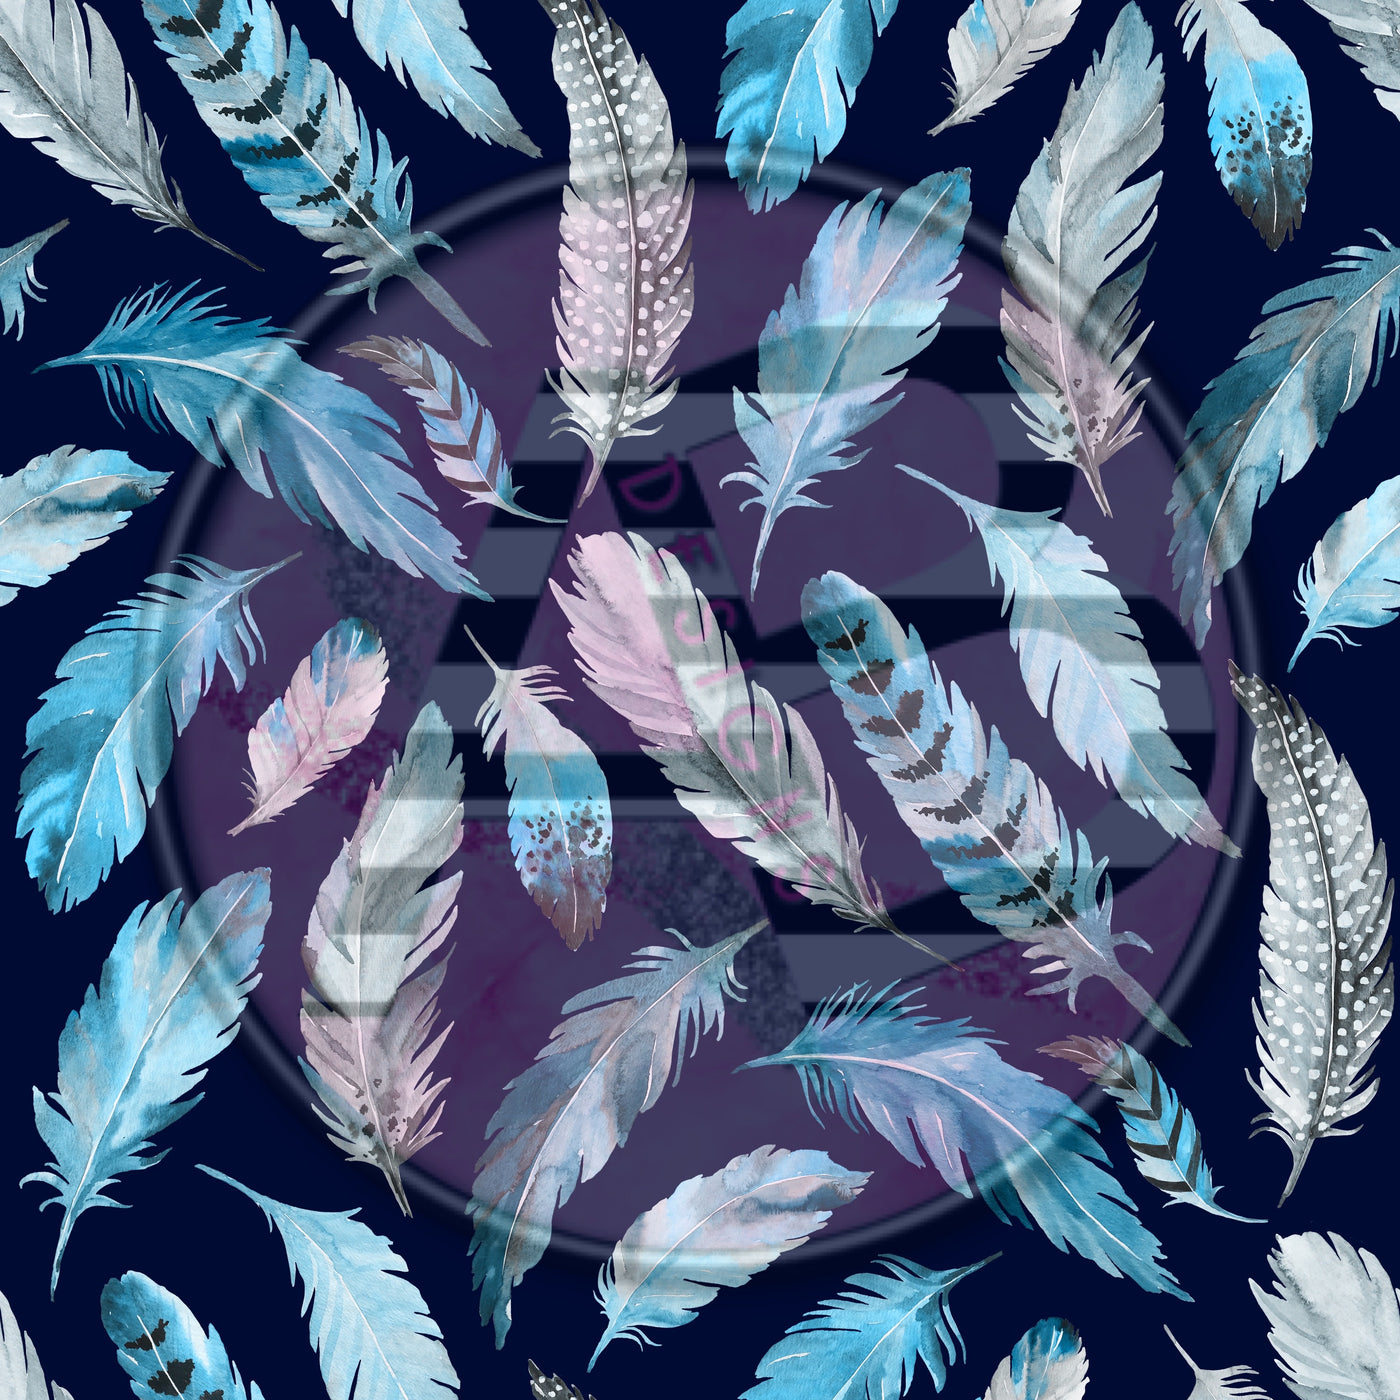 Adhesive Patterned Vinyl - Feathers 277